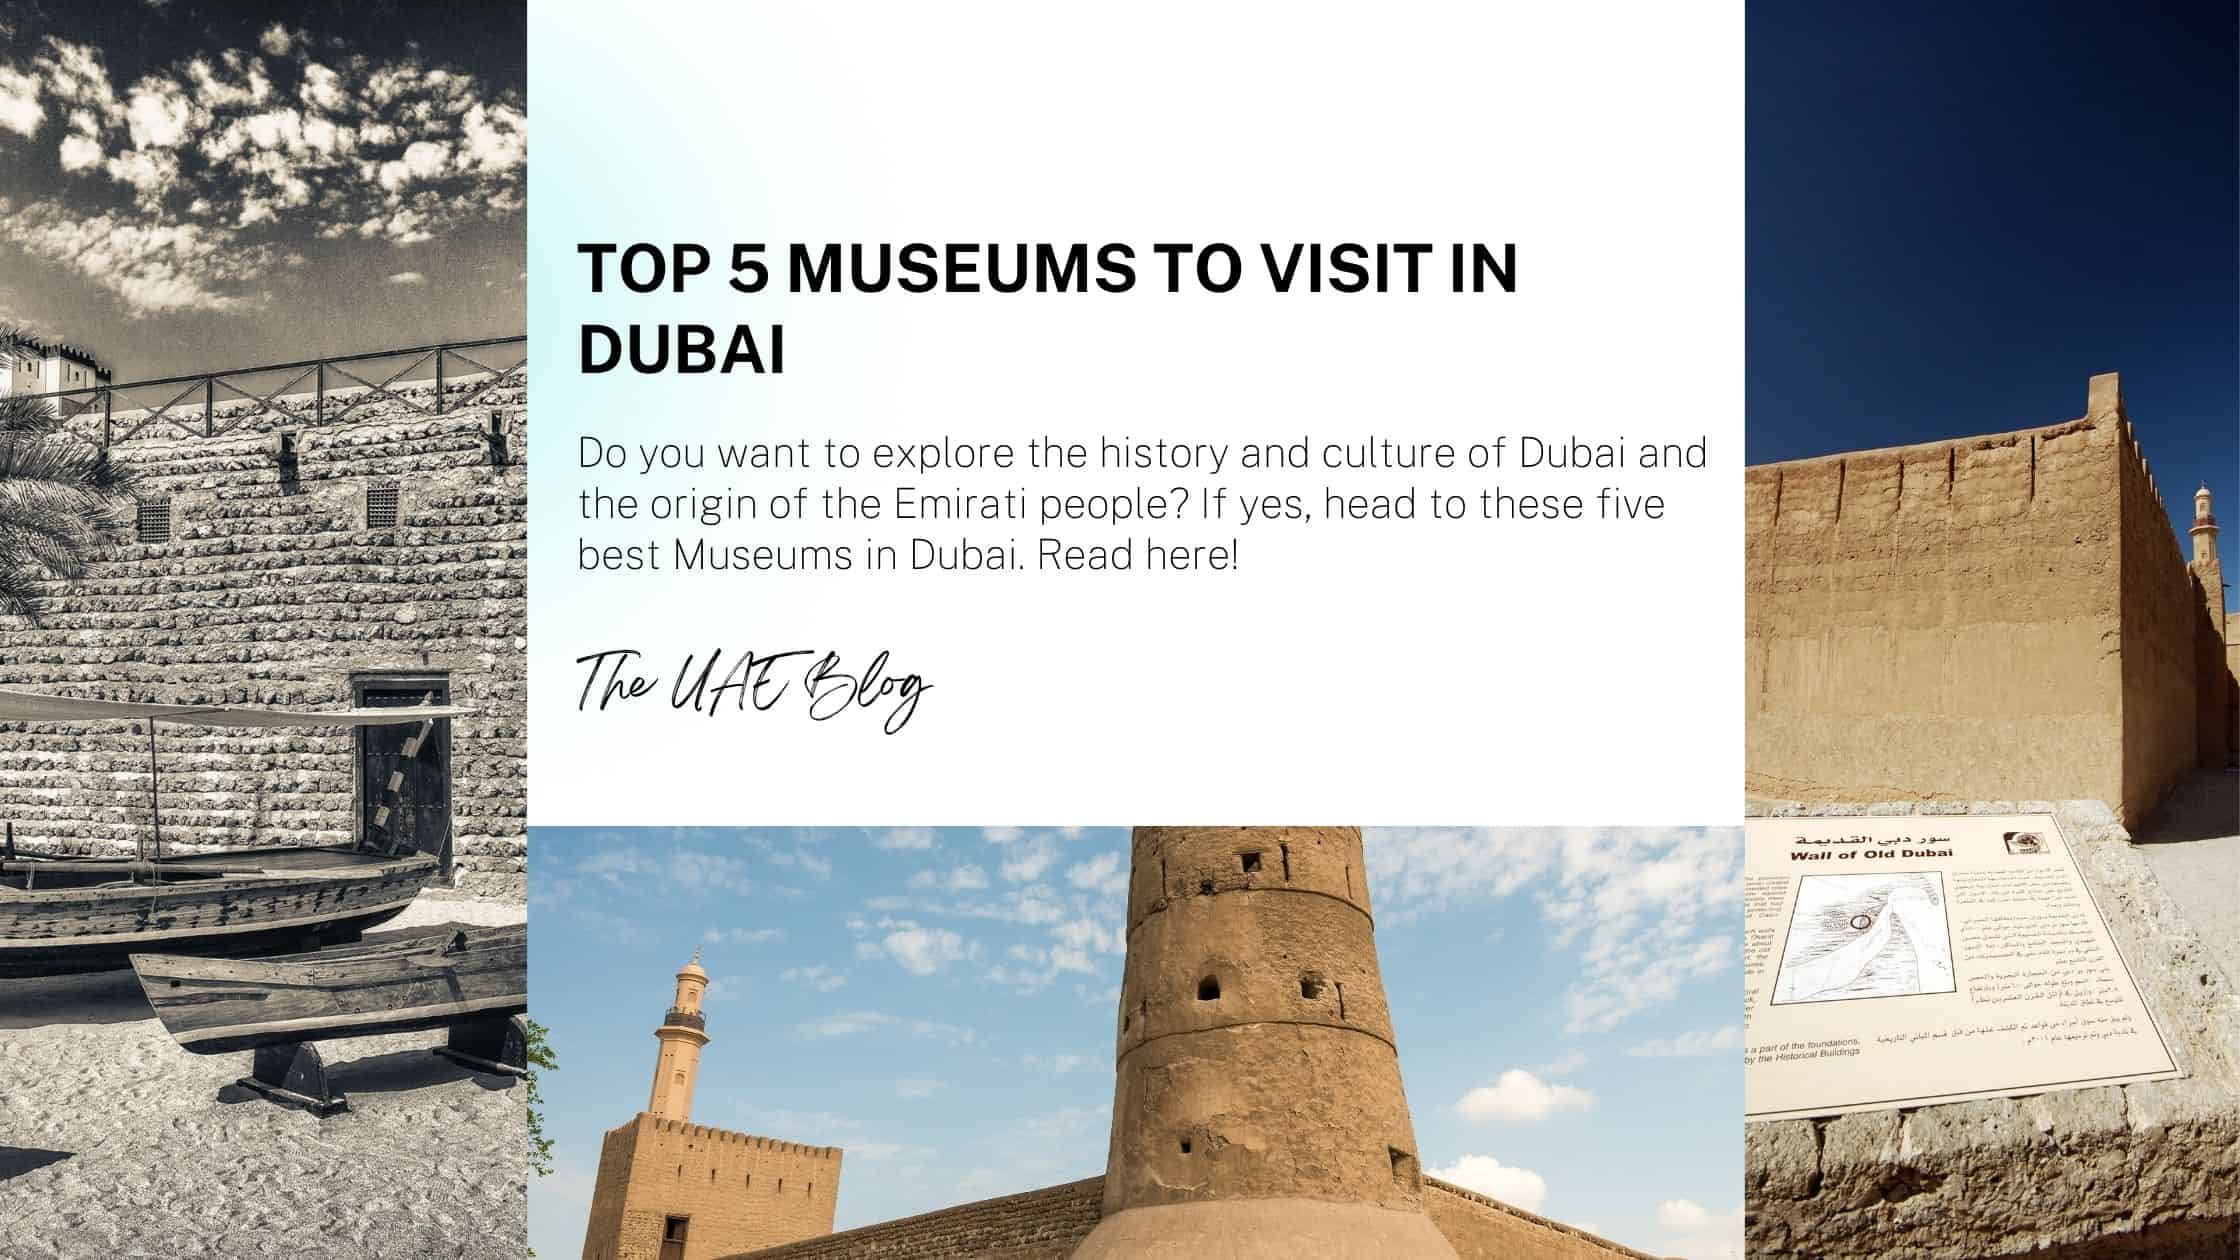 Top 5 Museums to Visit in Dubai